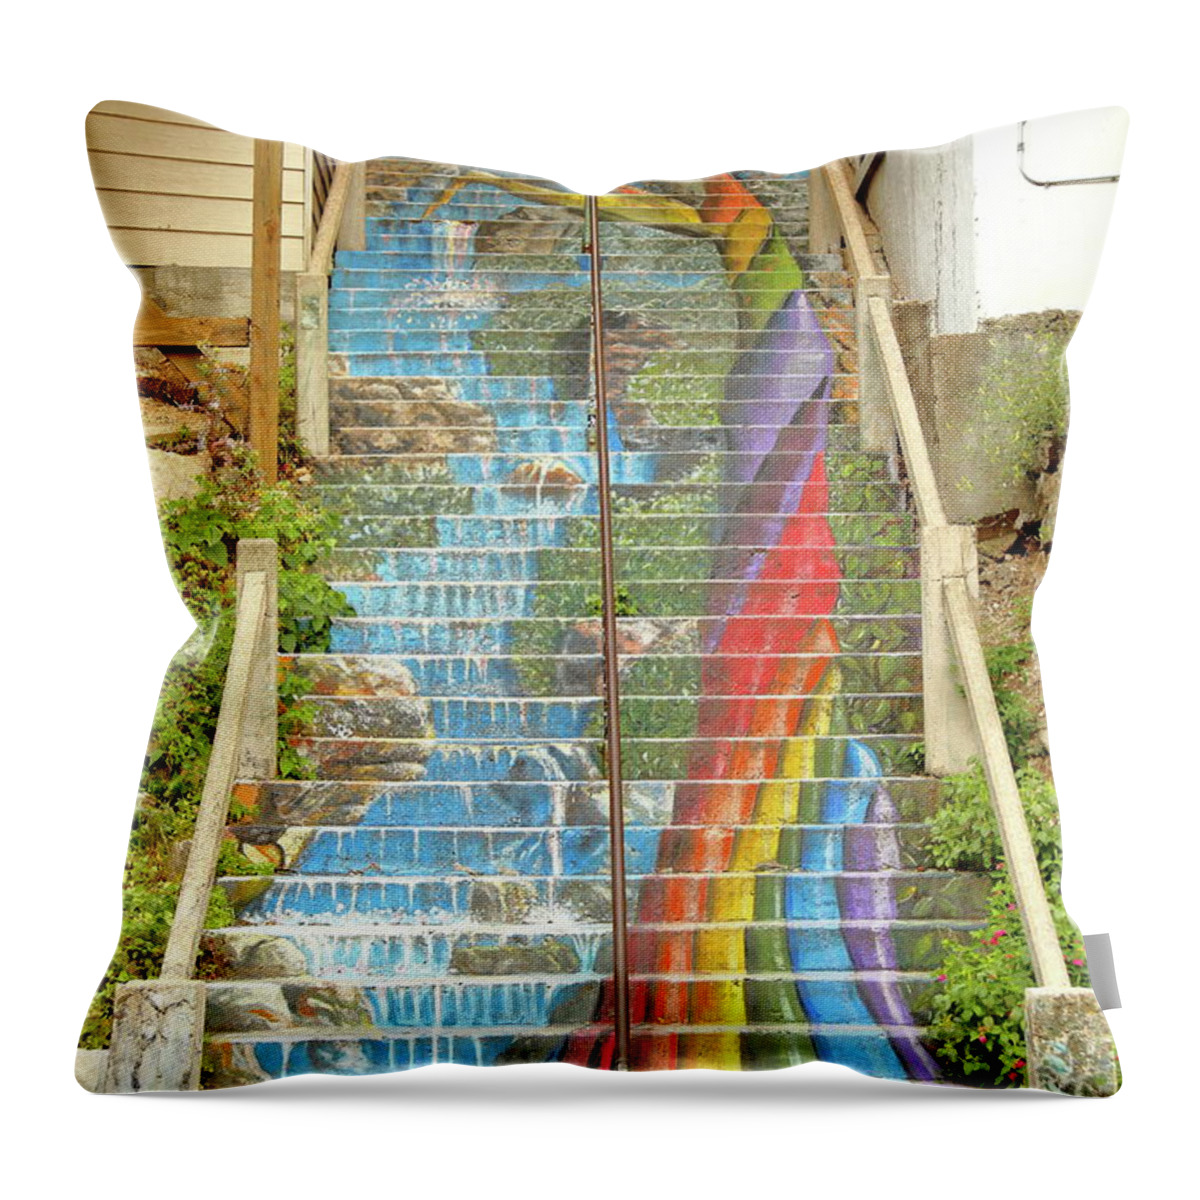 Stairway Throw Pillow featuring the photograph Rainbow Stairs by Lens Art Photography By Larry Trager